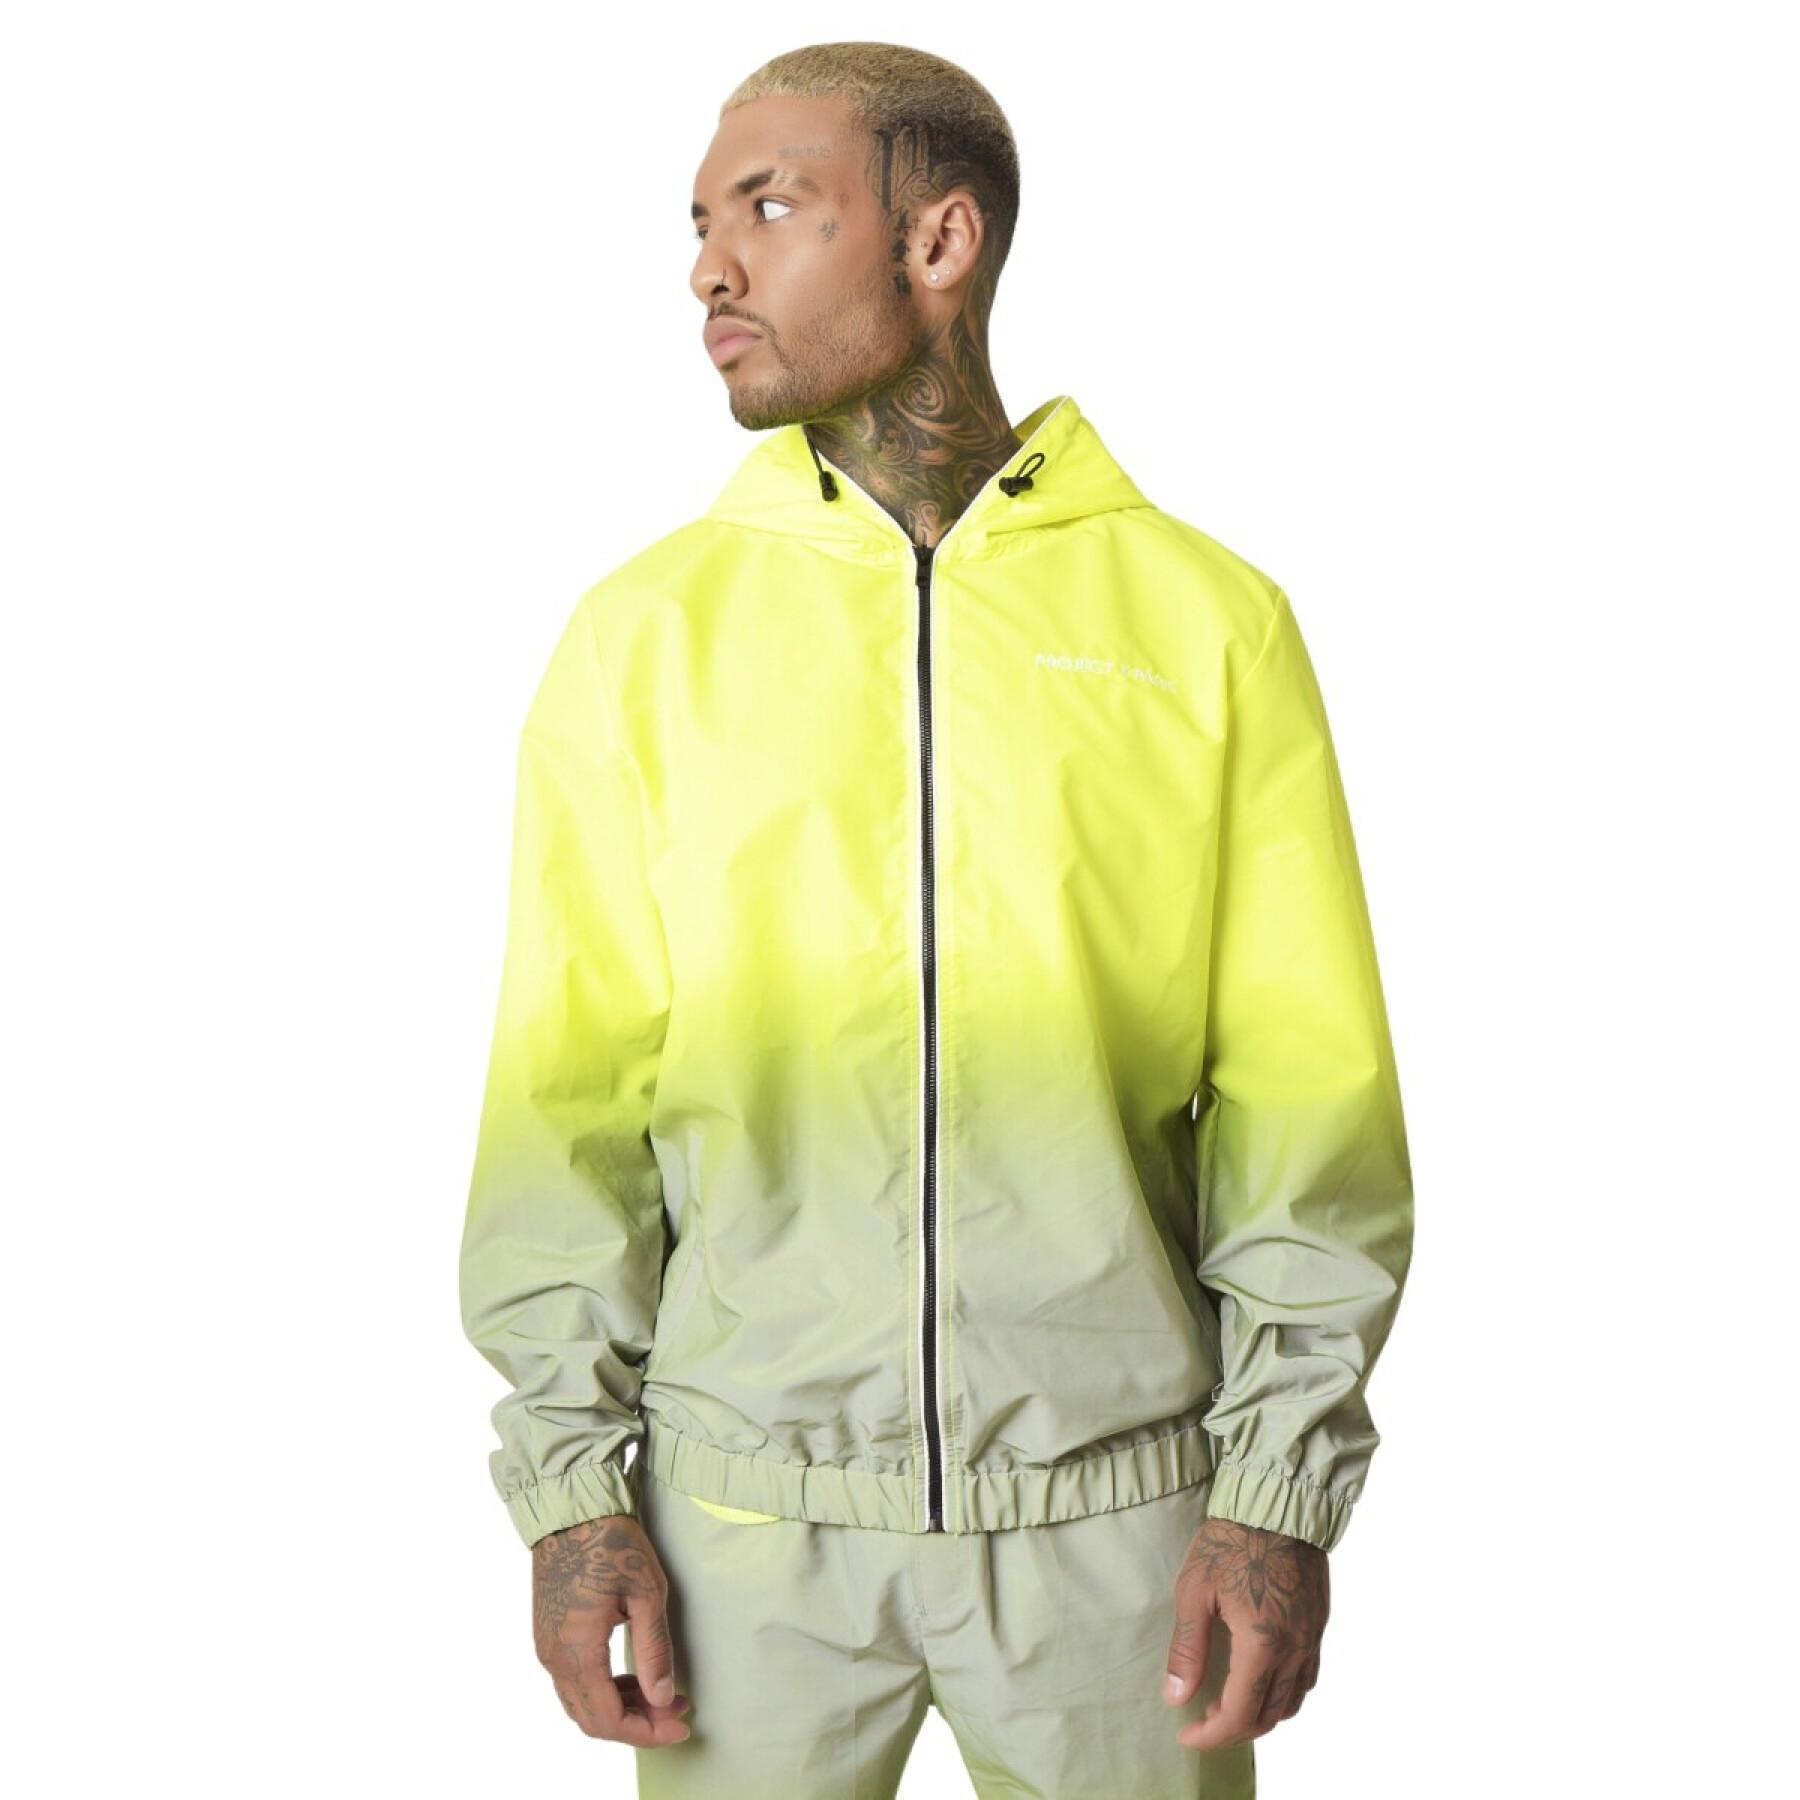 Hooded reflective jacket with gradient Project X Paris